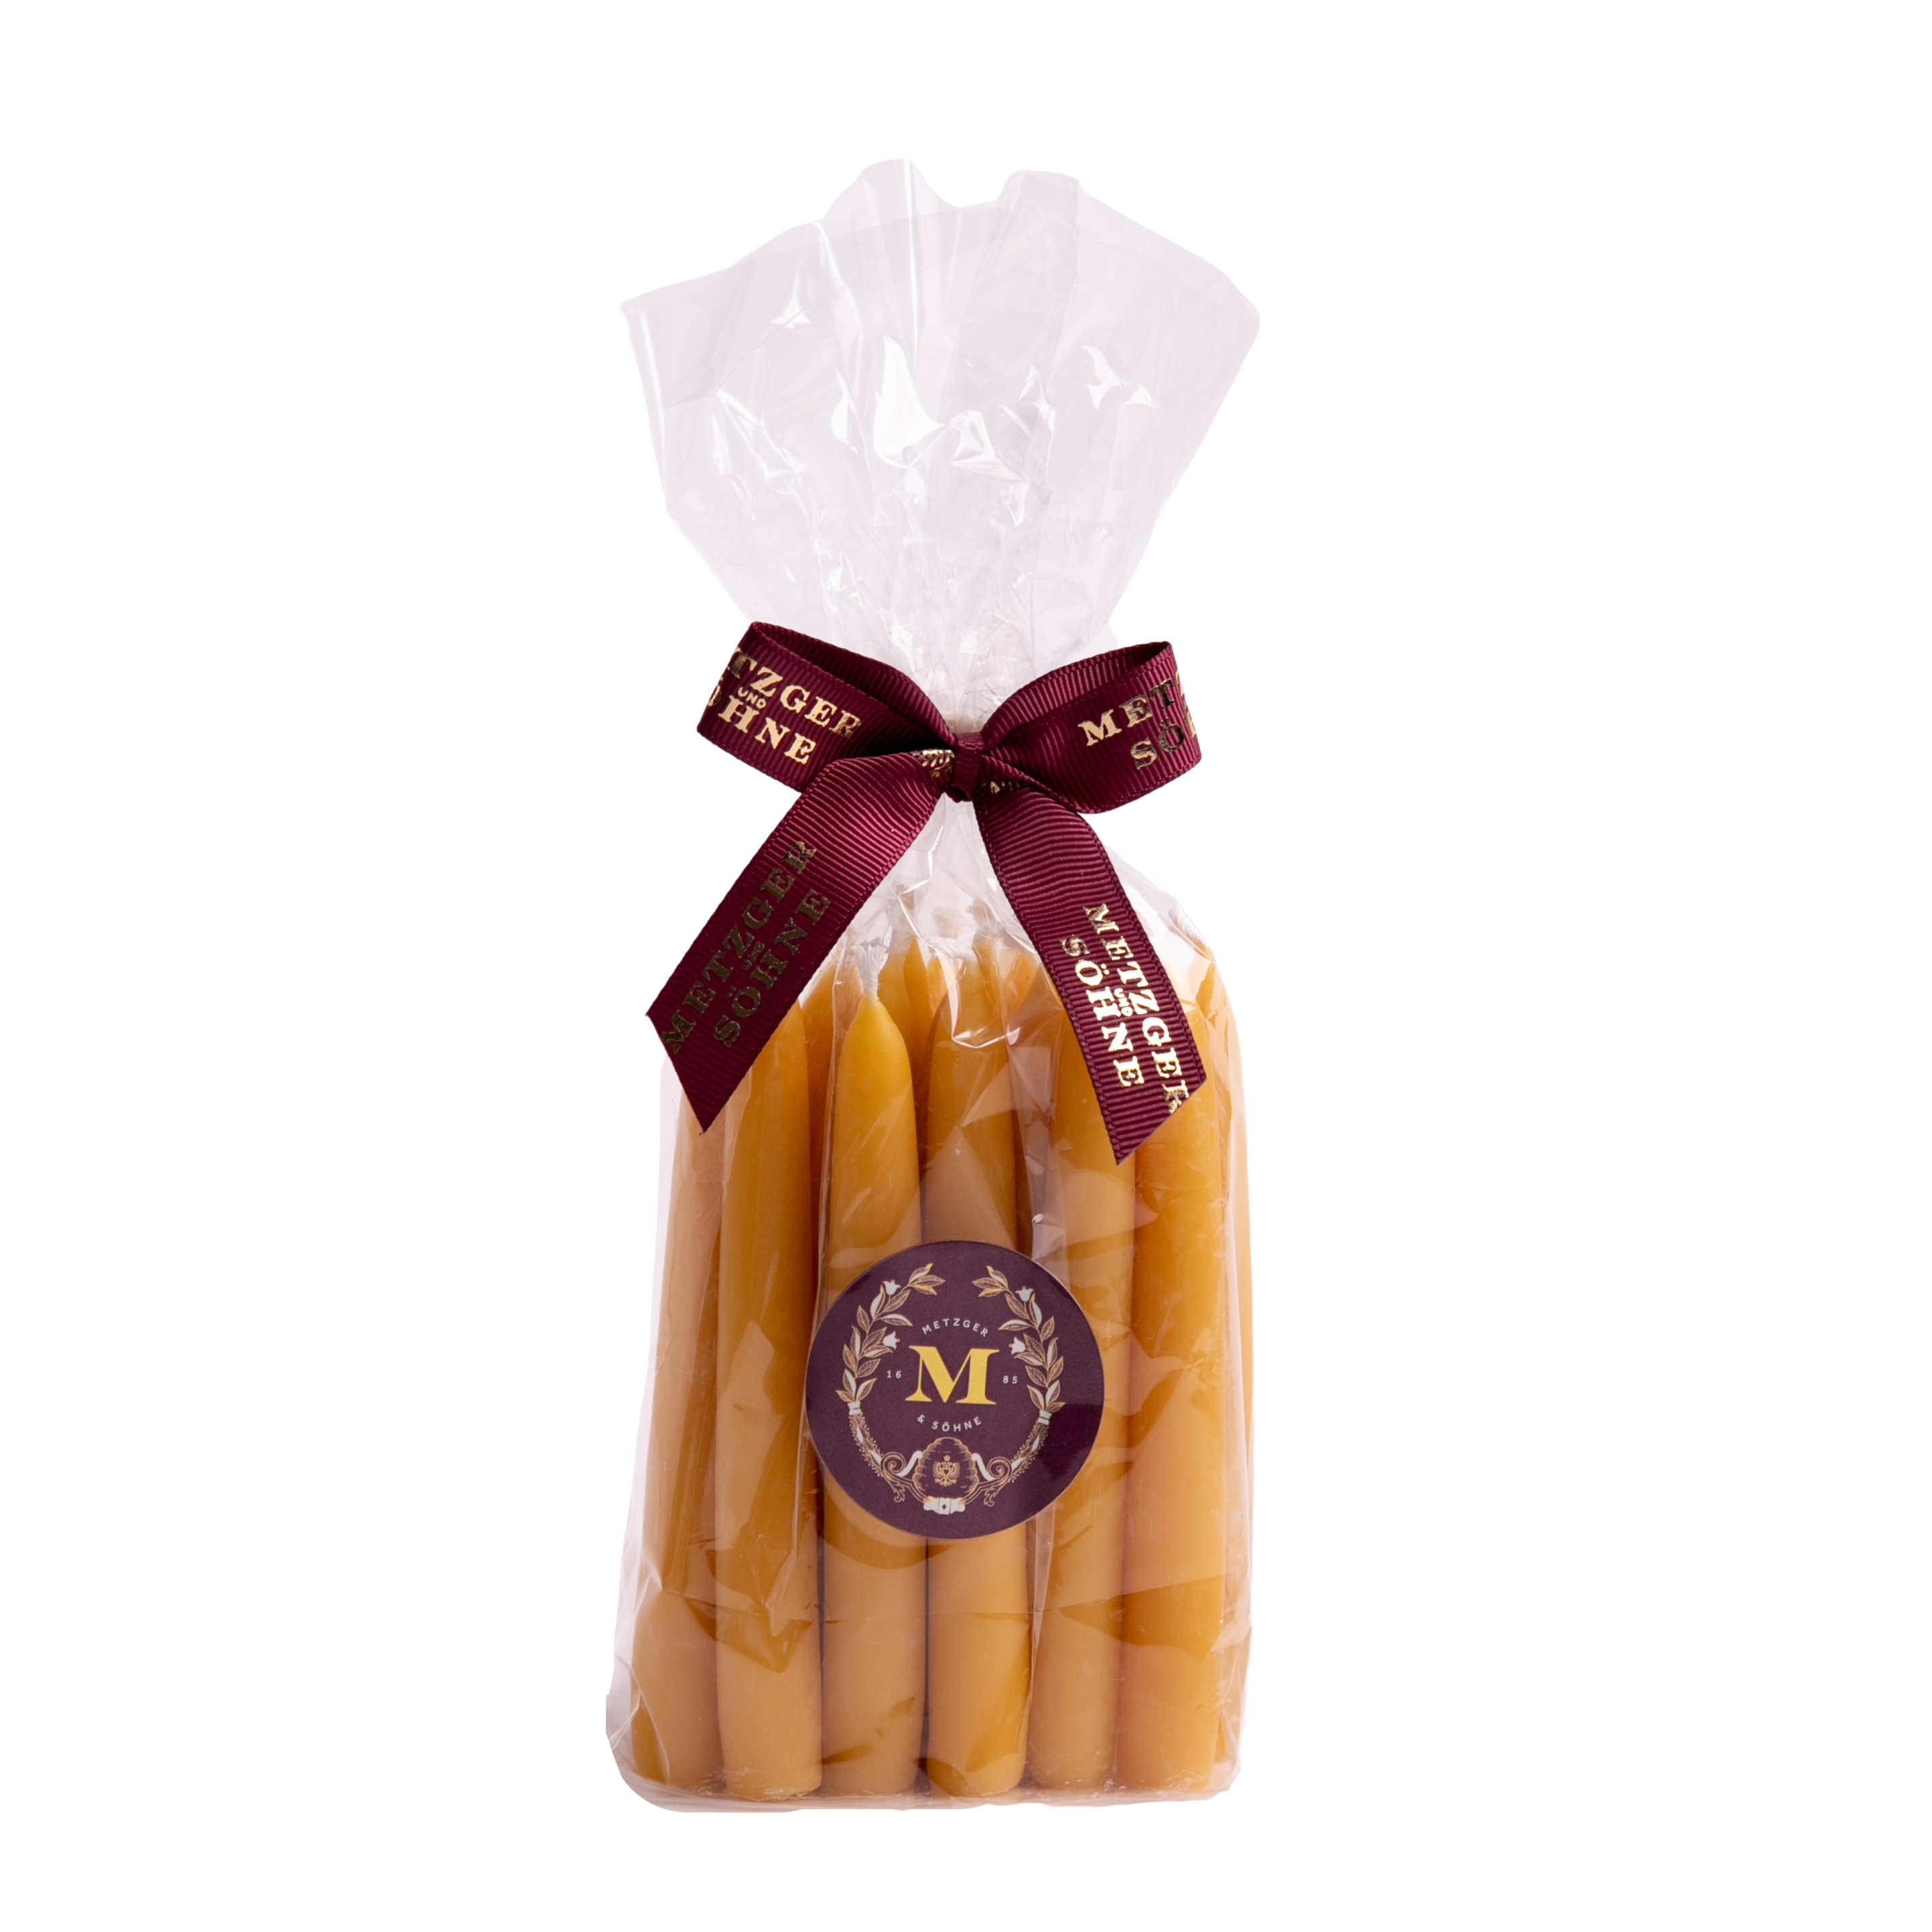 20 Christmas tree candles 13x120mm made from 100% beeswax. Beeswax is a pure natural product, produced by honey bees. 